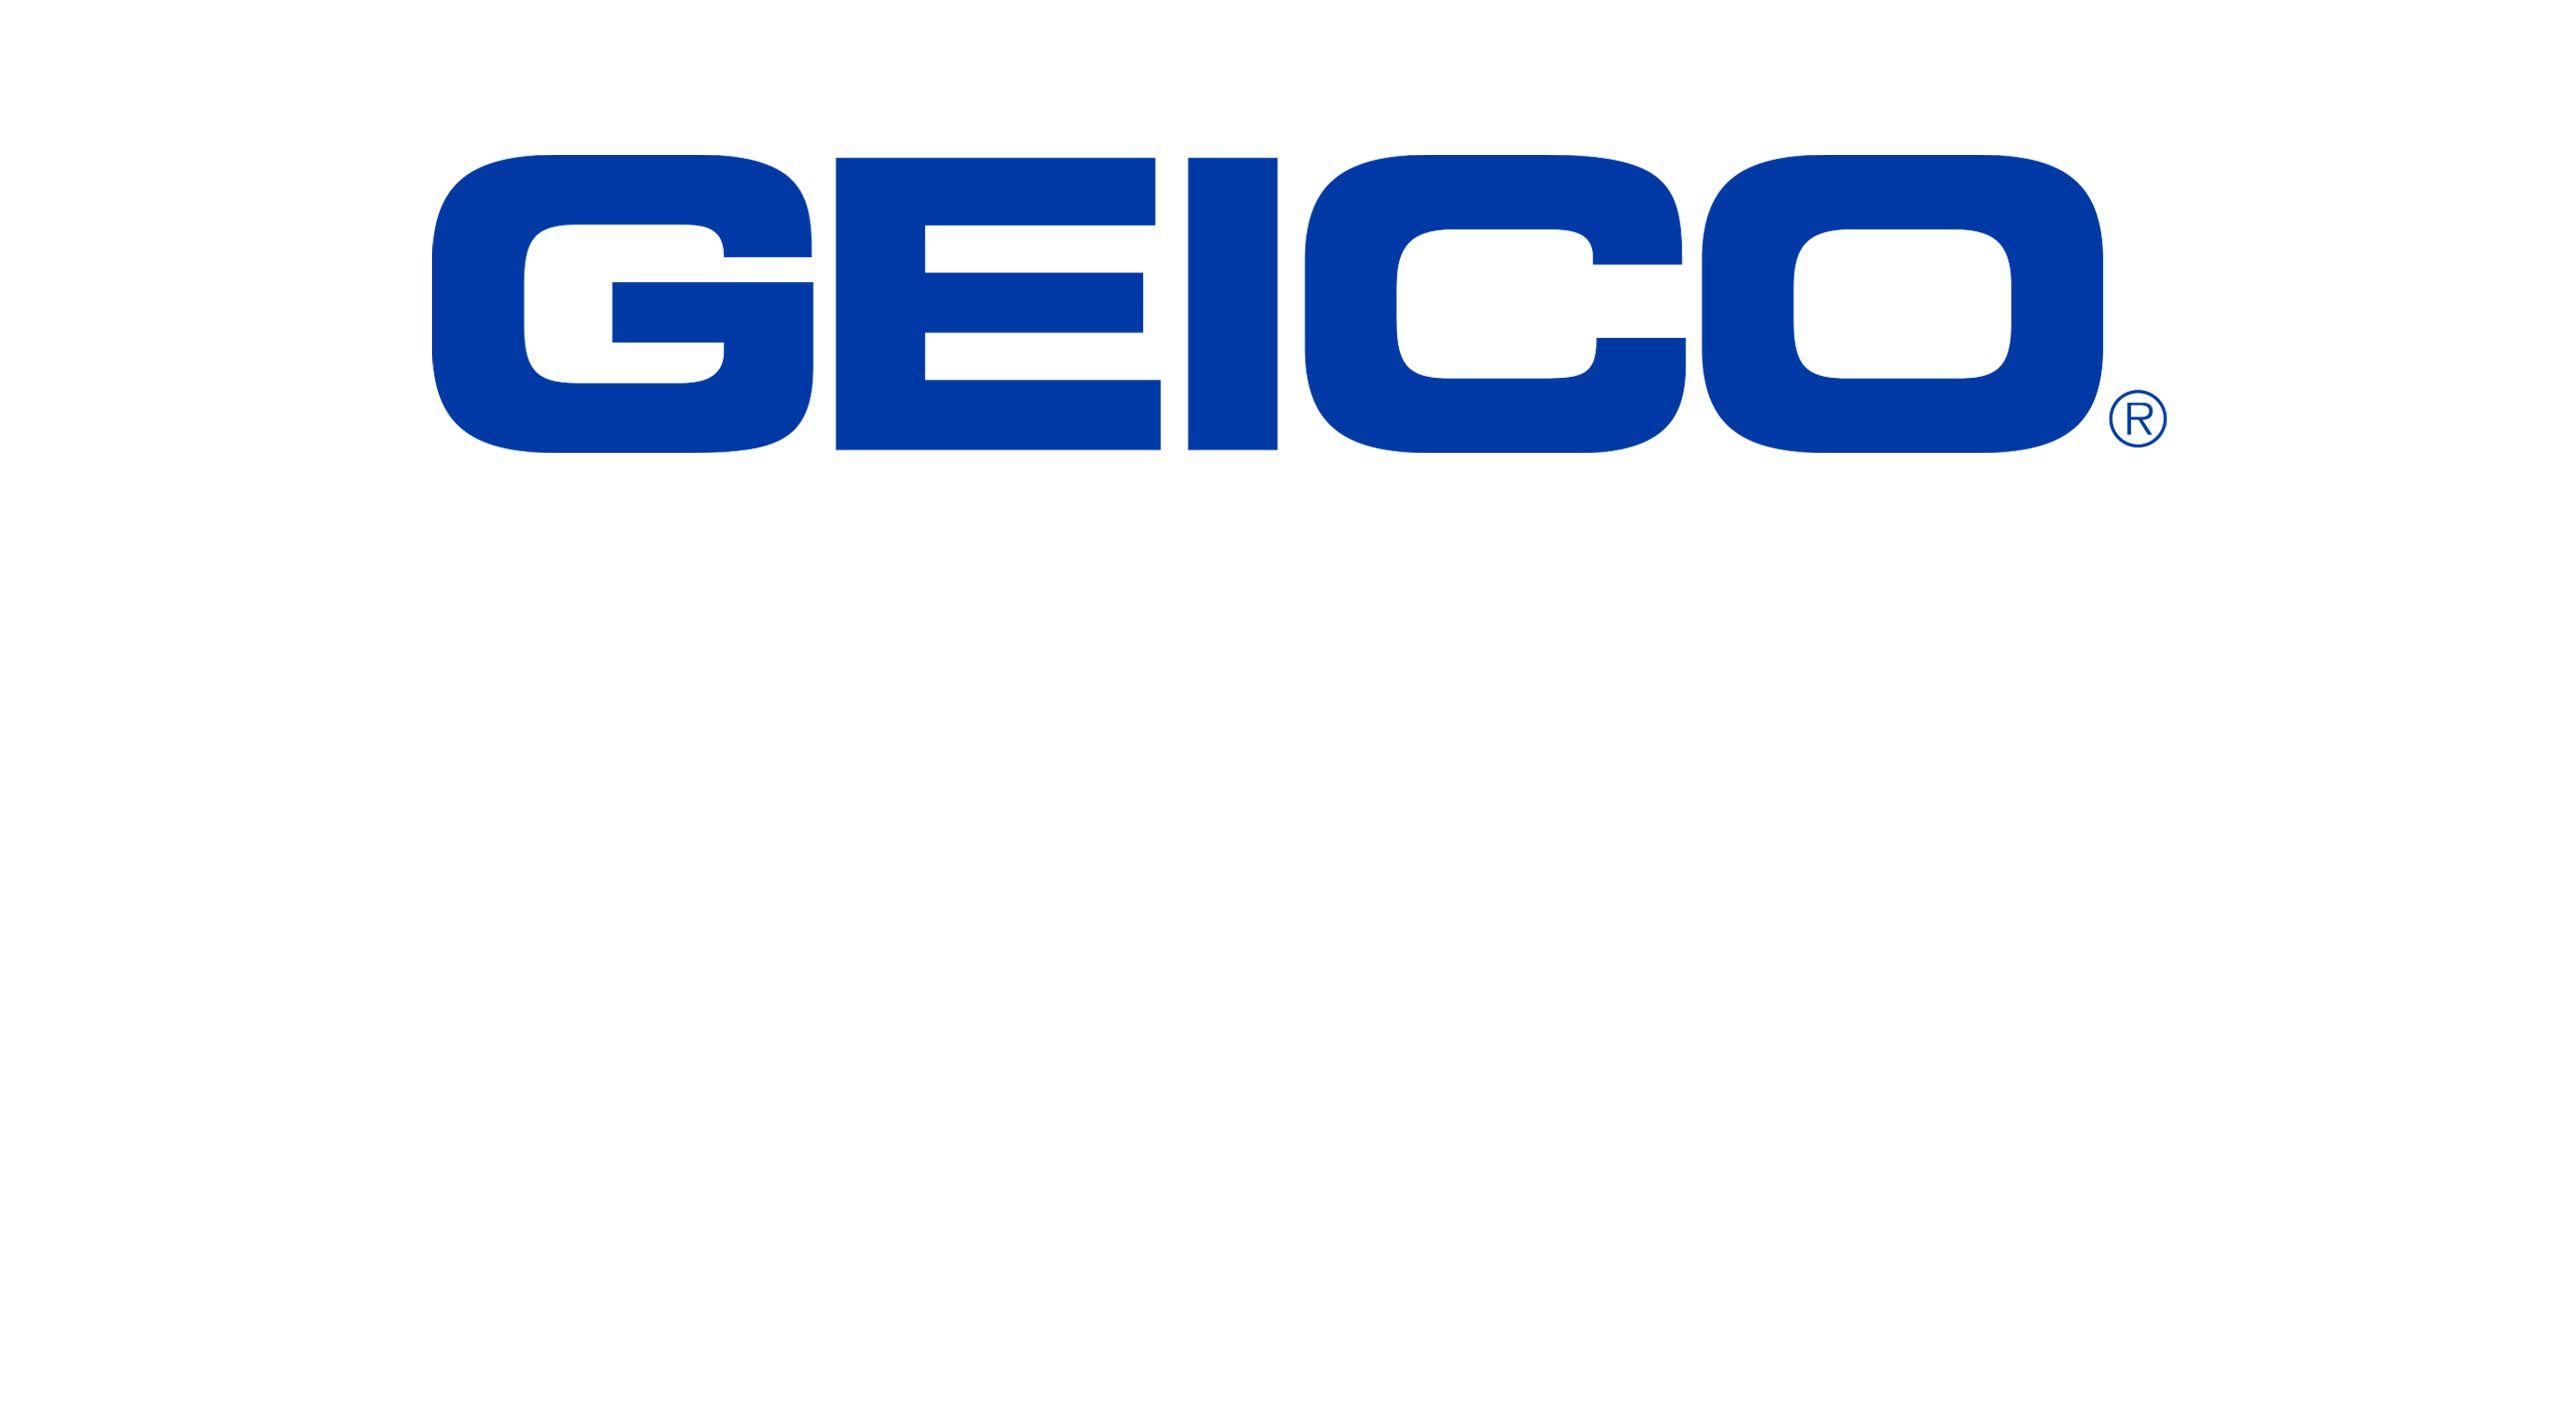 Gieco Logo - Geico Logo Png (image in Collection)